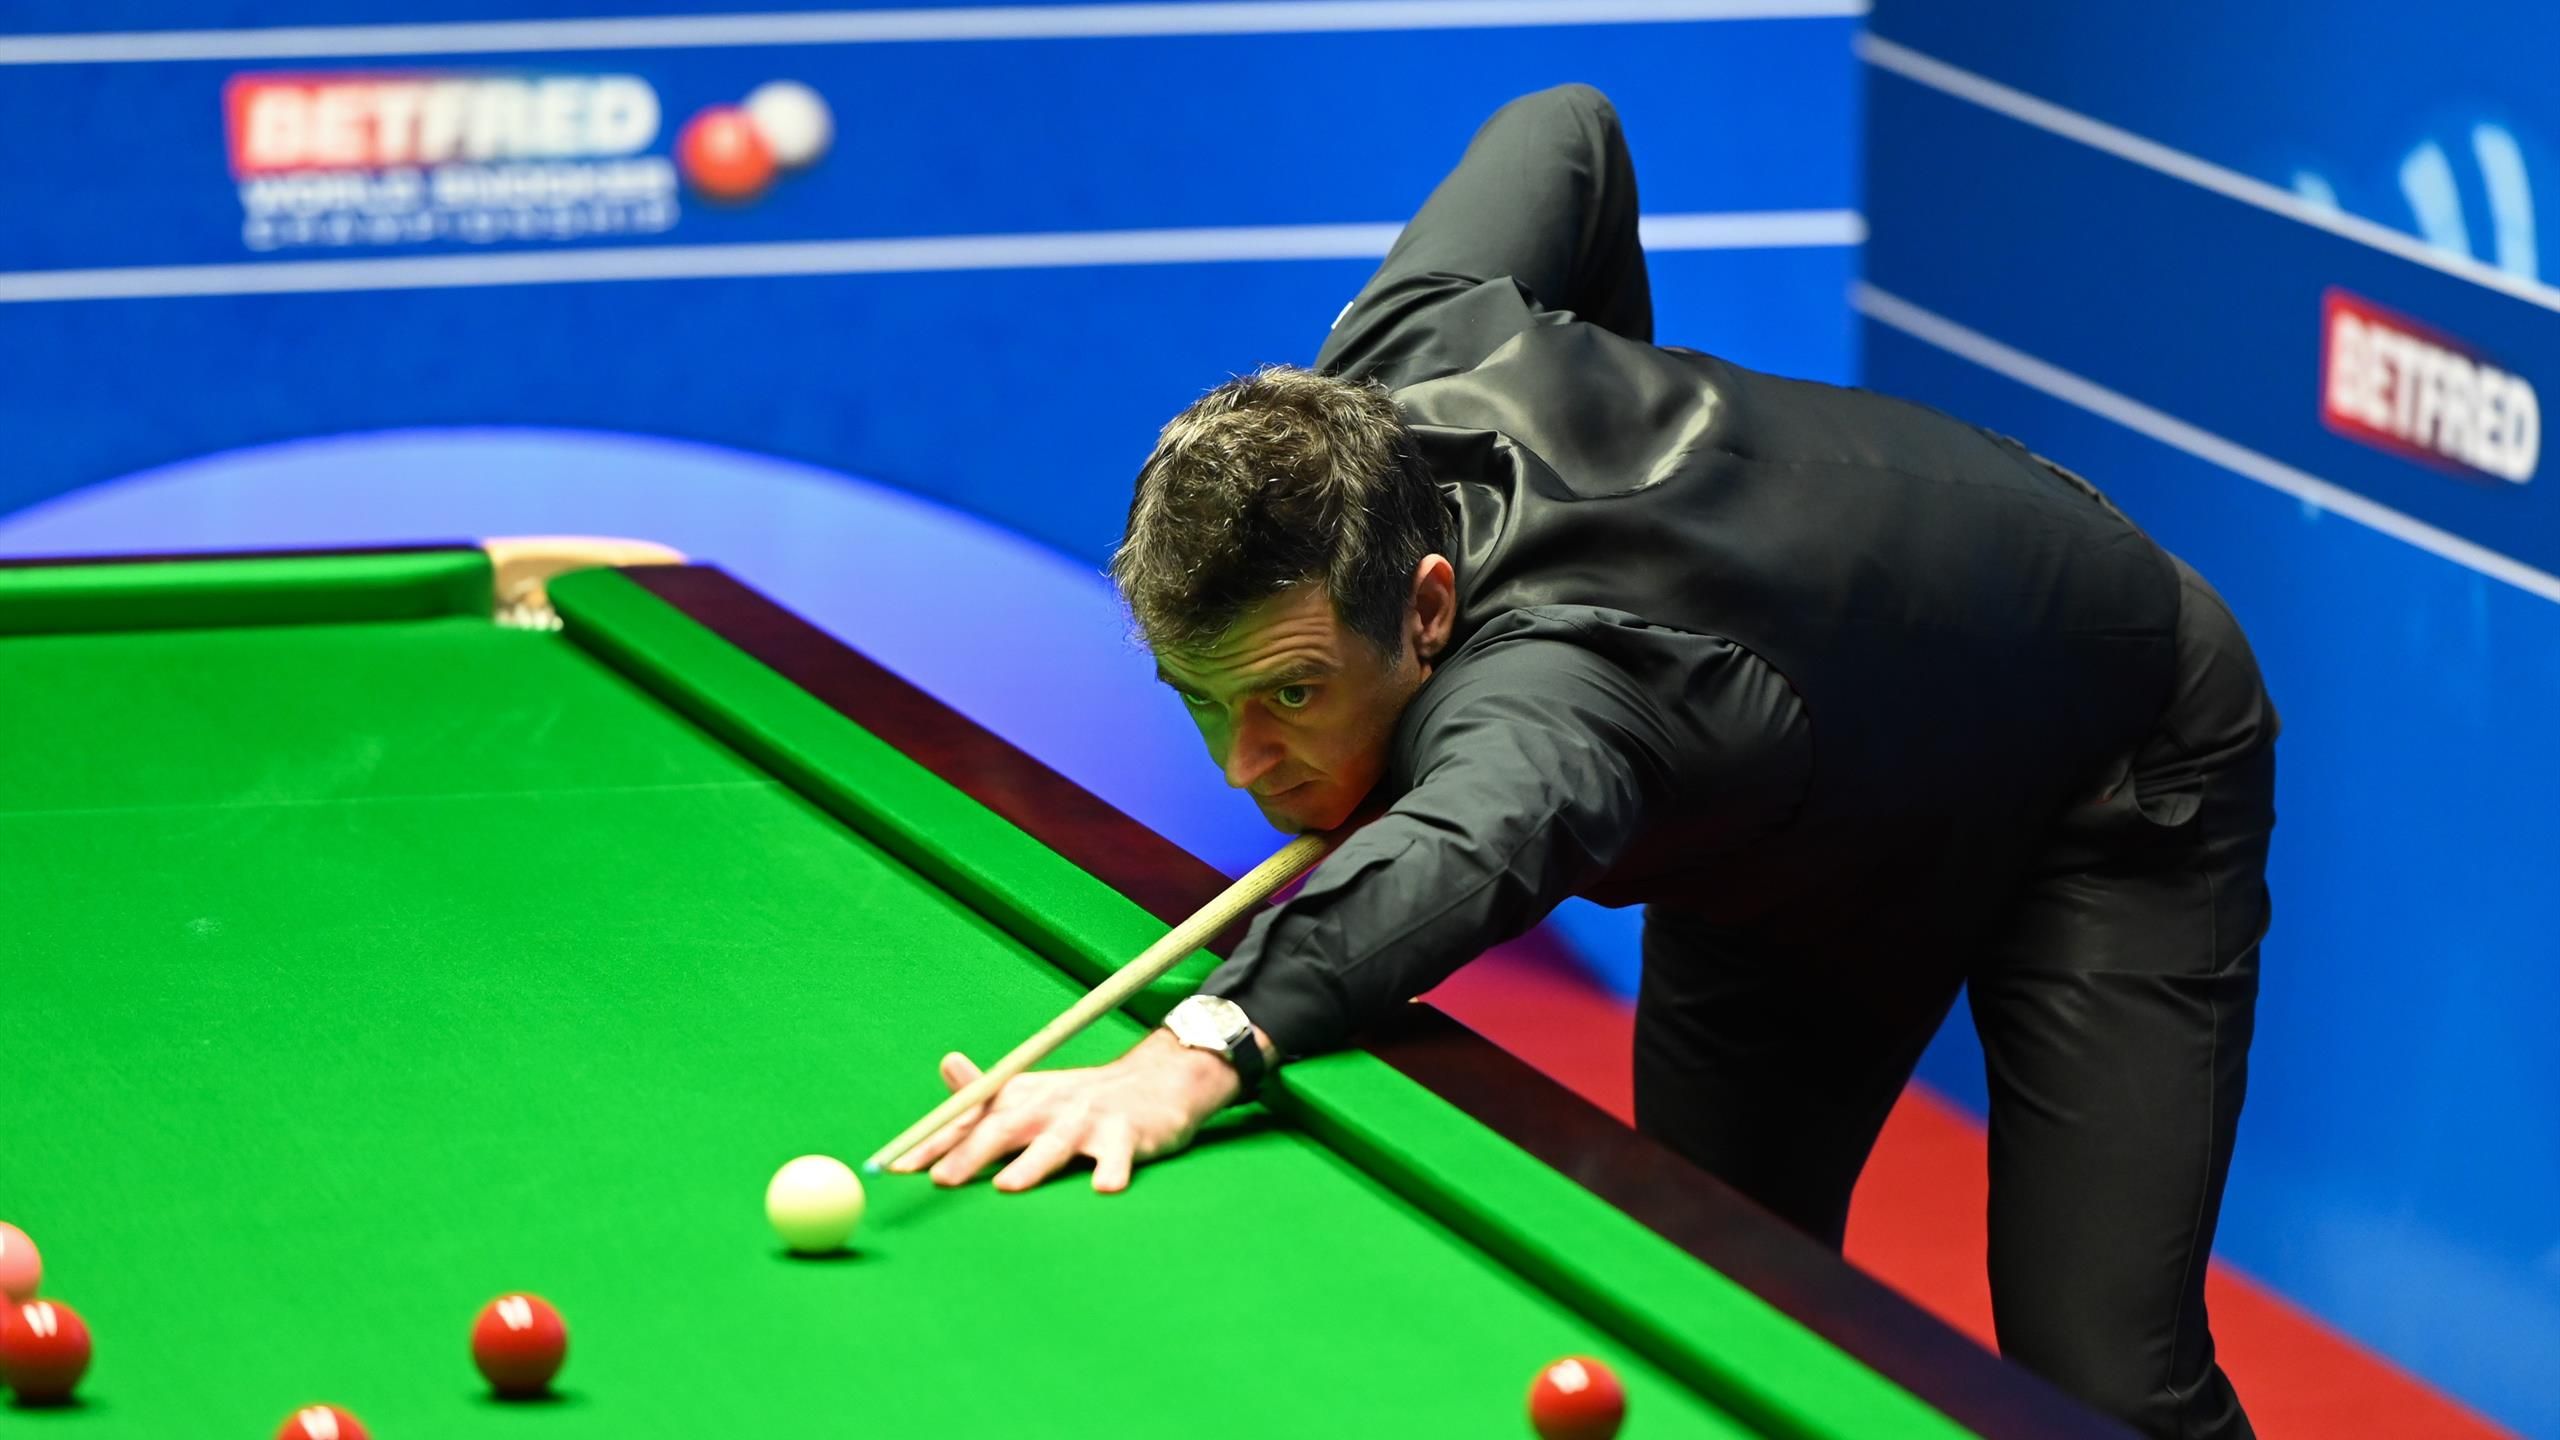 snooker players championship 2022 live